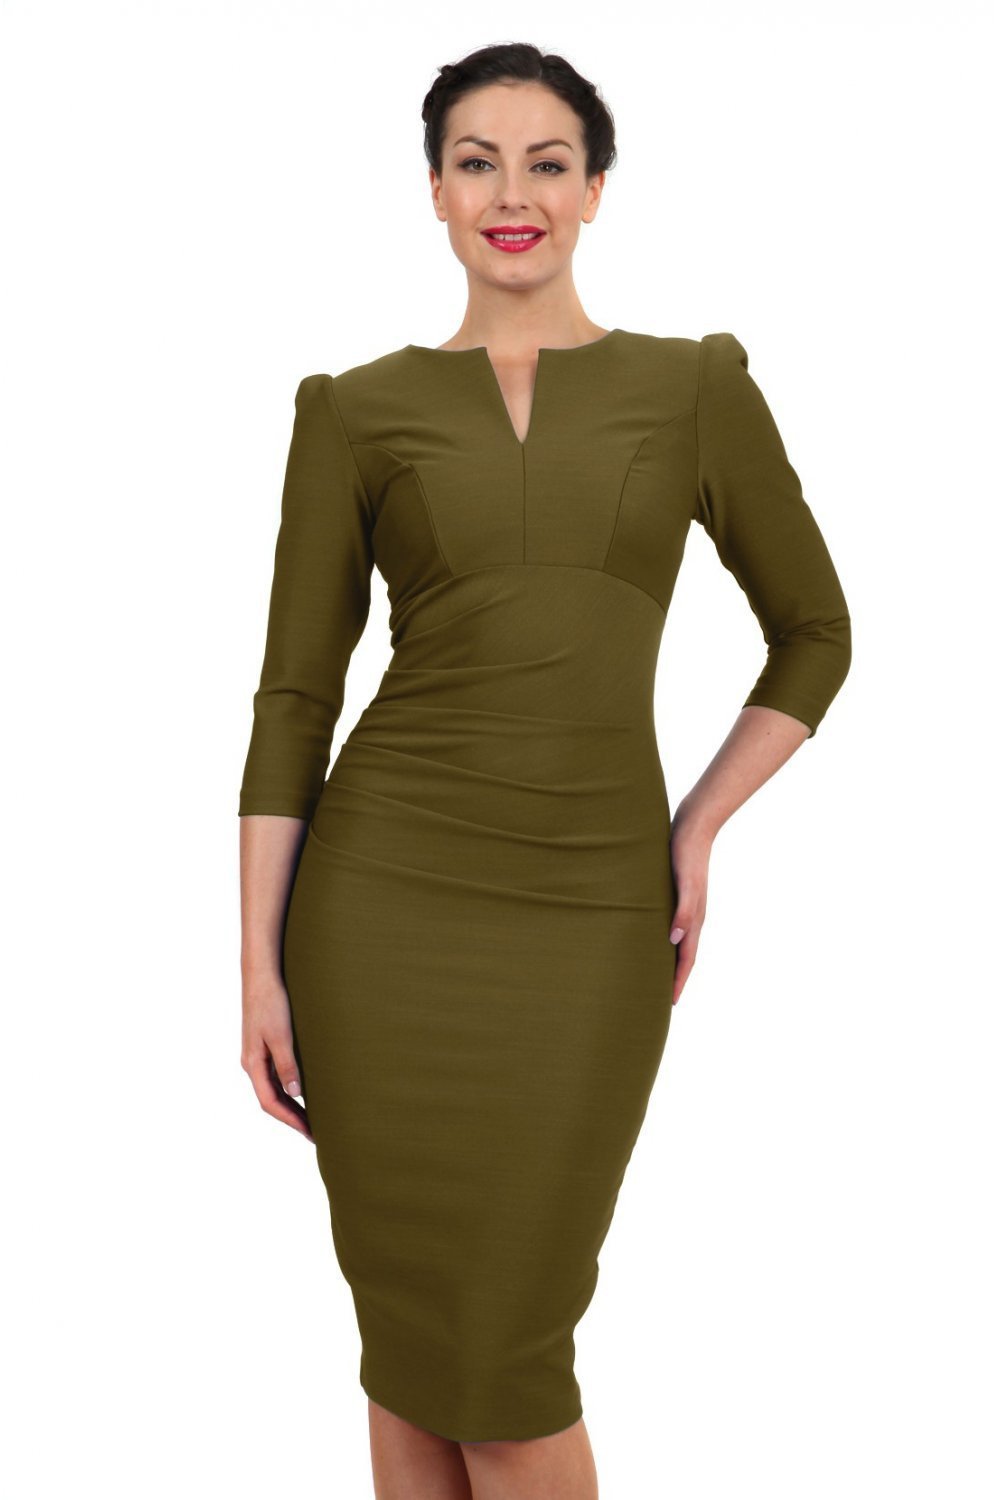 model is wearing diva catwalk seed fitzrovia sleeved pencil dress in olive green front